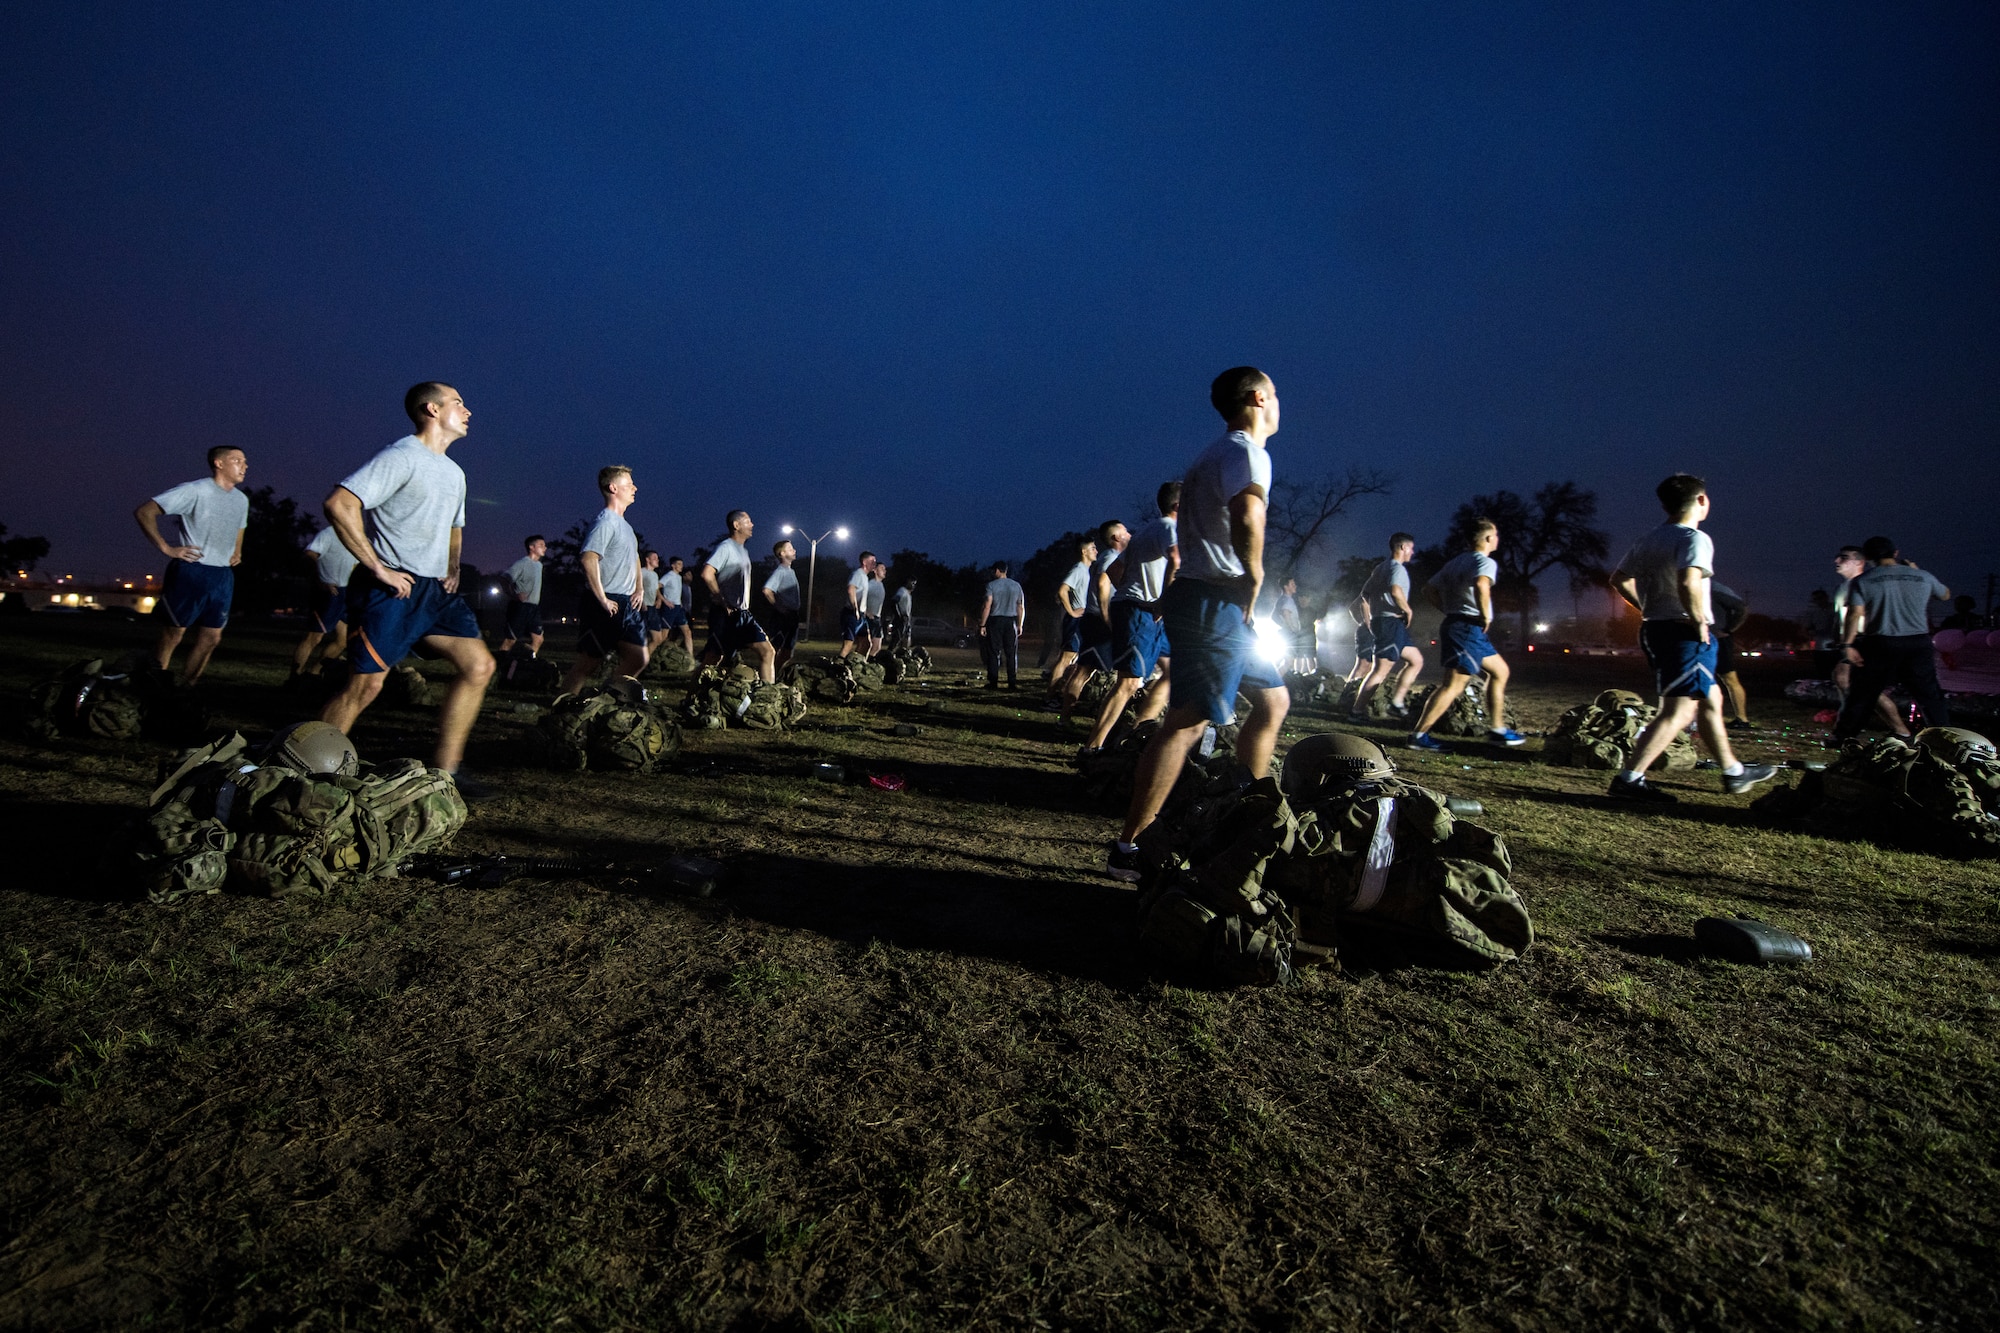 Special warfare trainees conducting physical training early in the morning in darkness